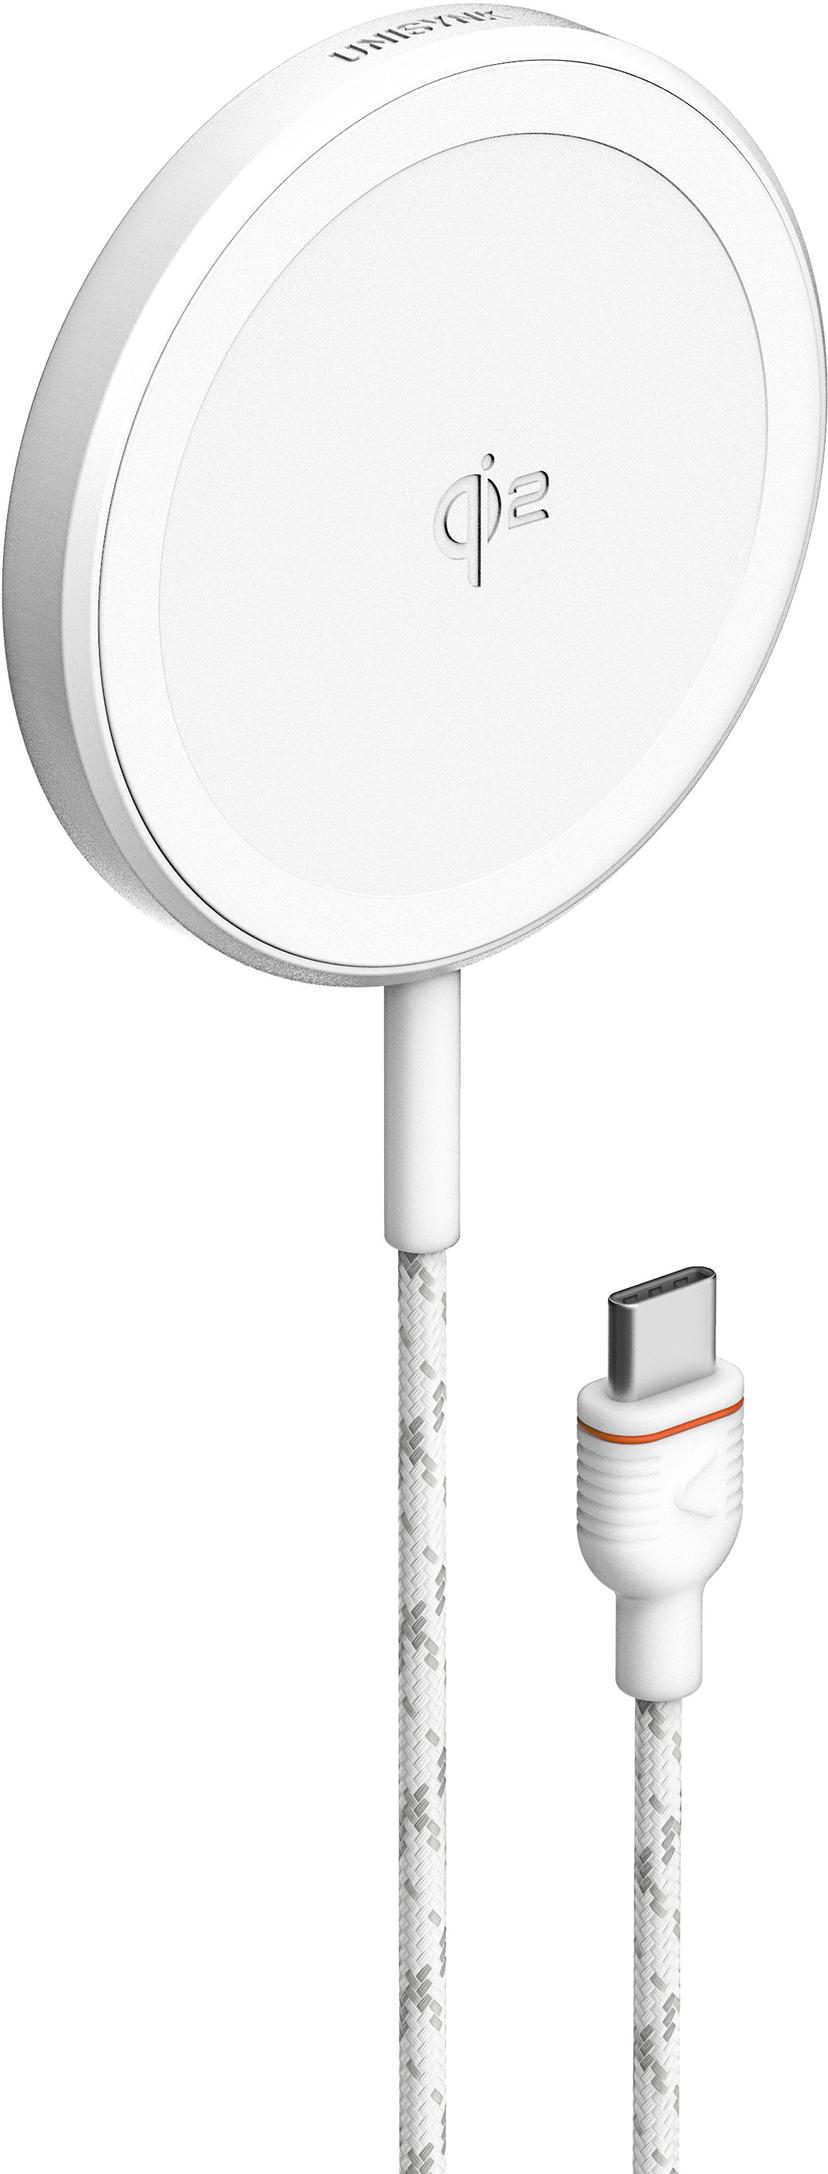 Unisynk Magnetic Wireless Charger Qi2 15W